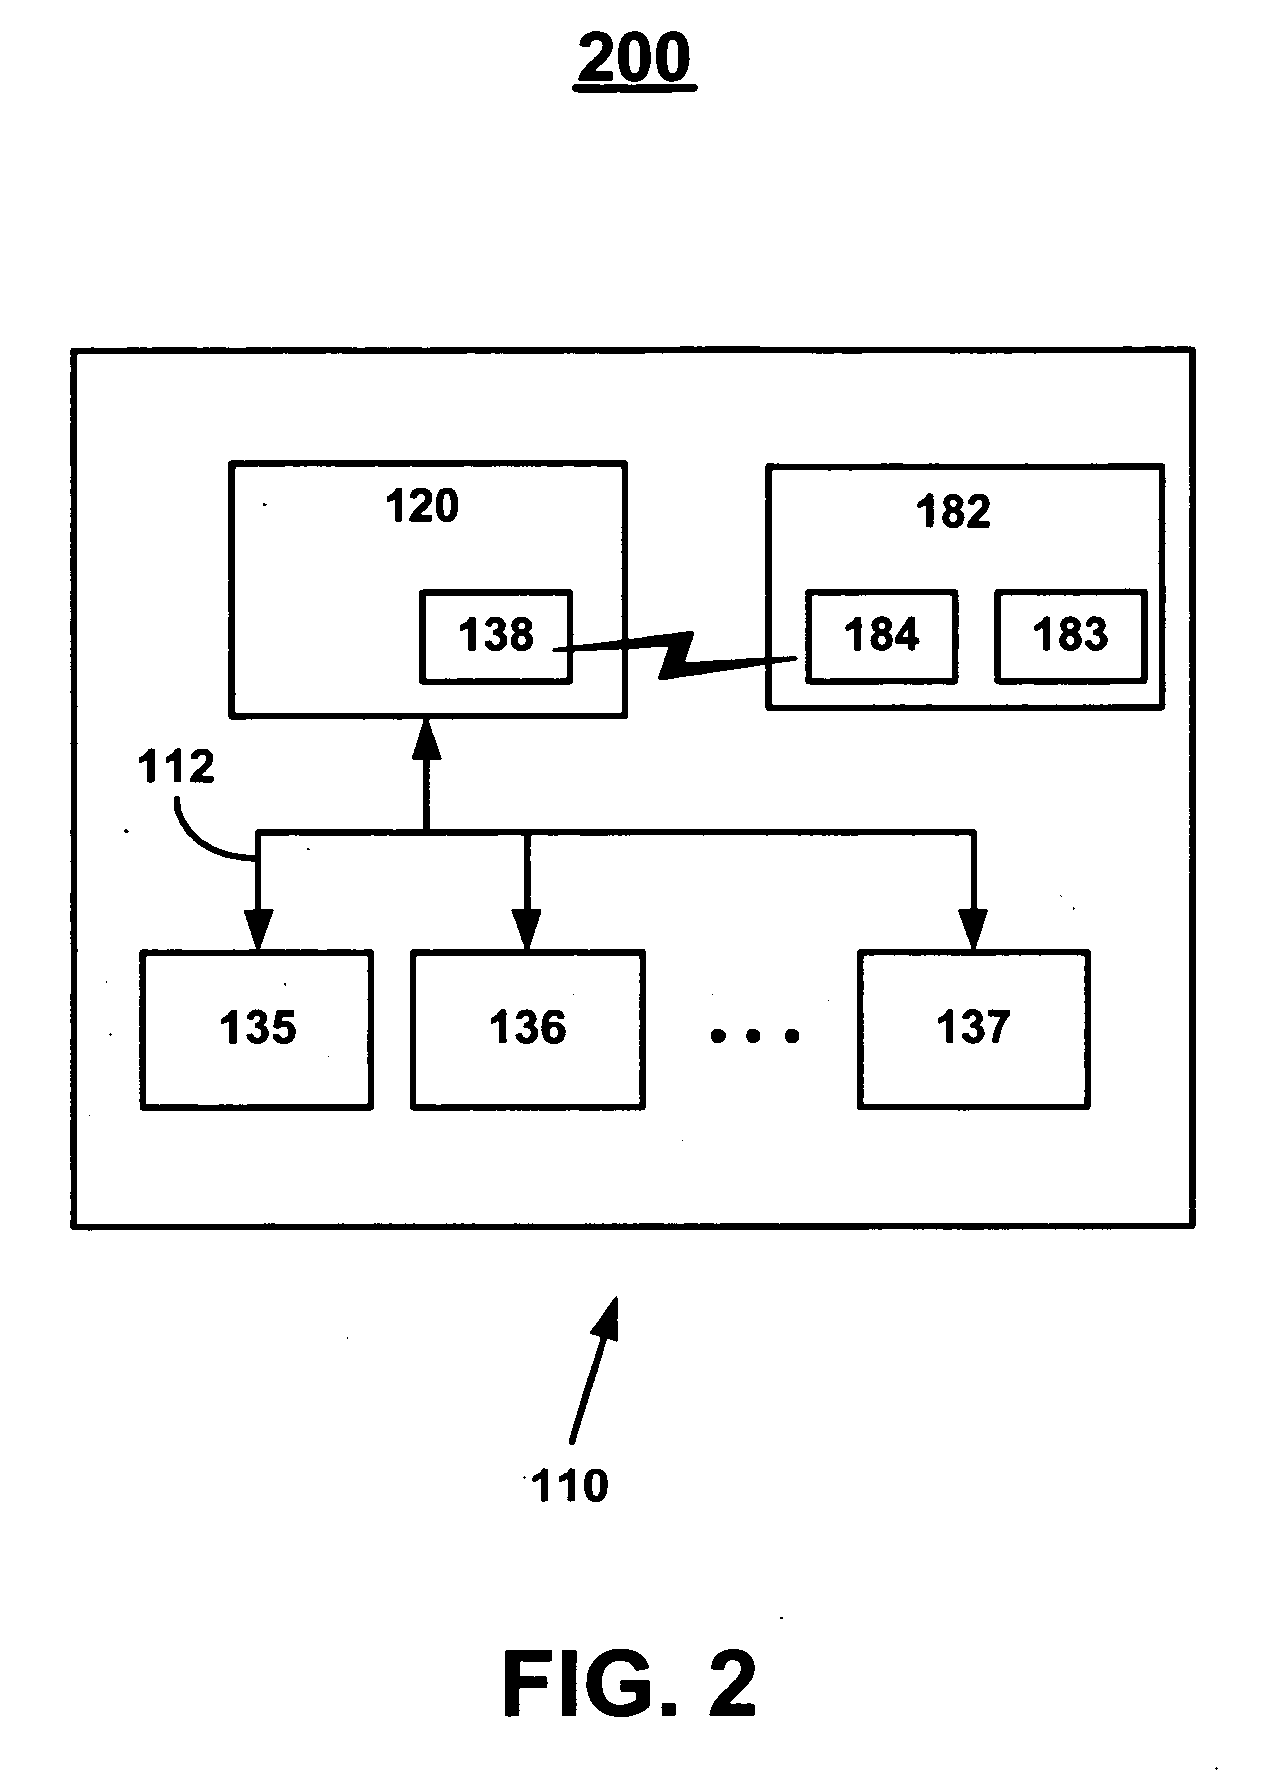 System and method for data storage and diagnostics in a portable communication device interfaced with a telematics unit